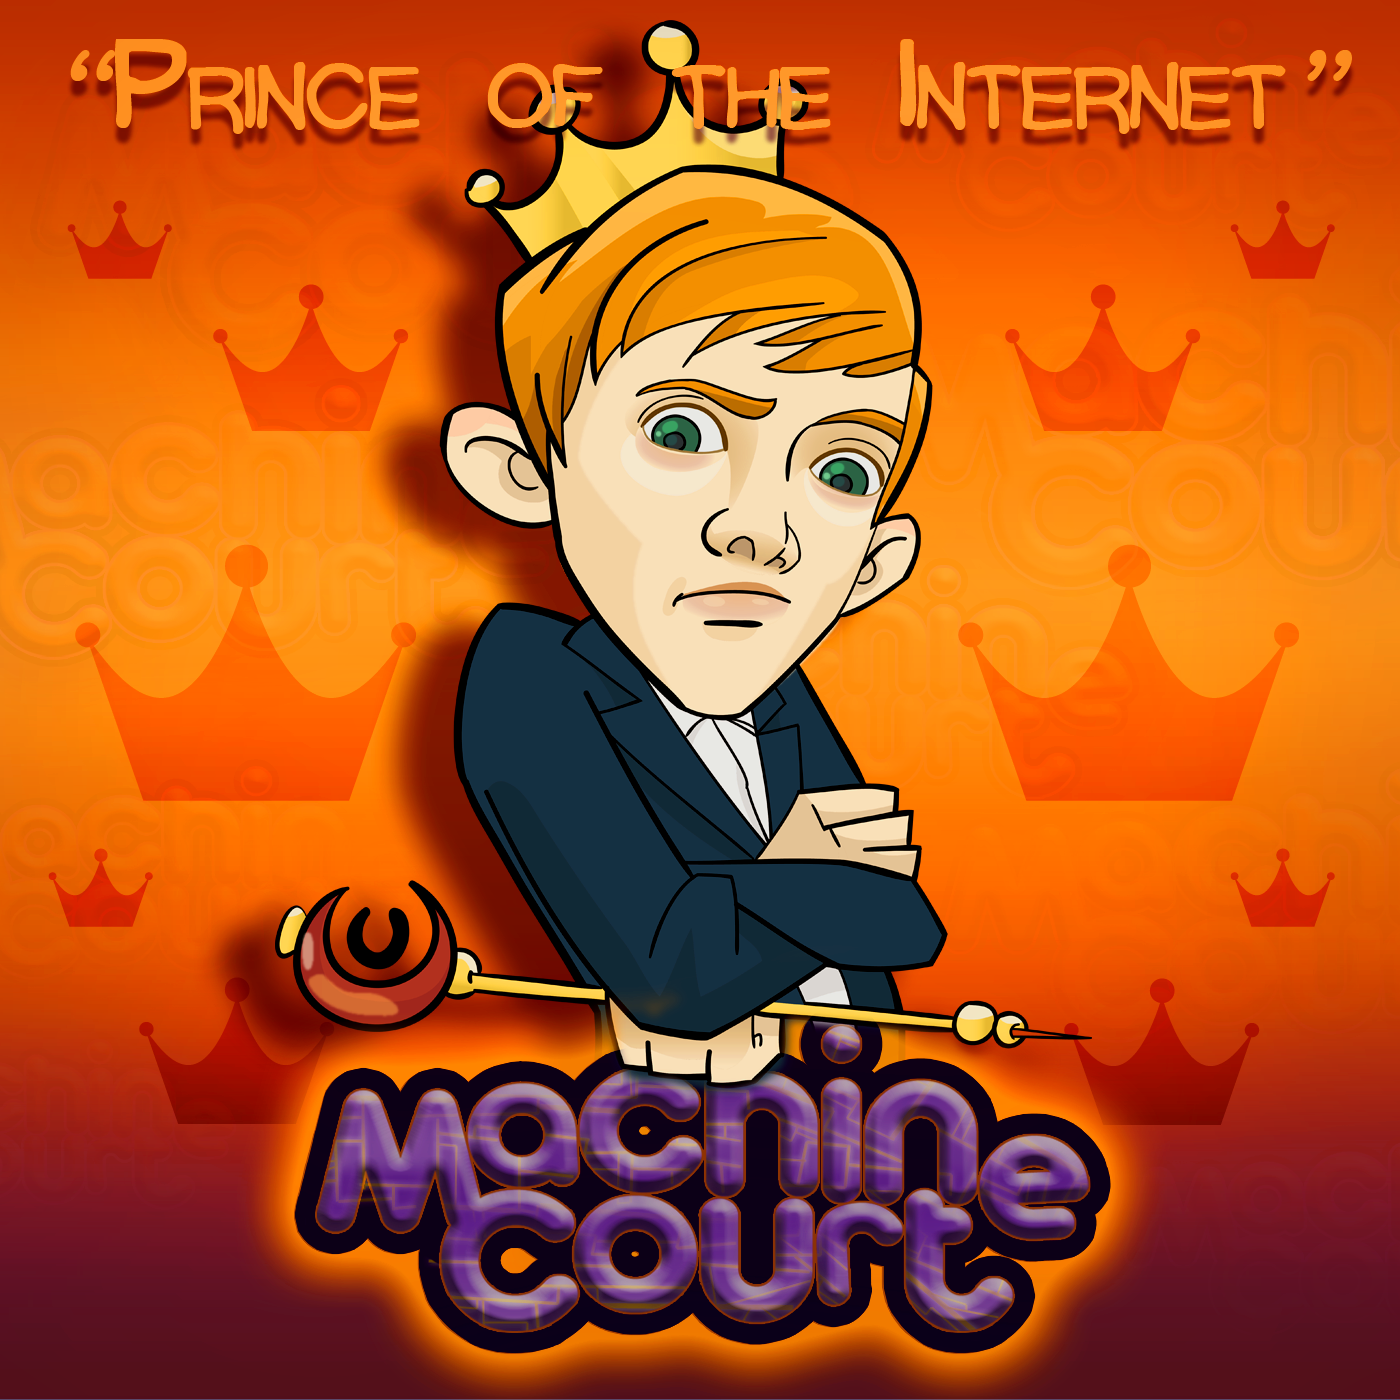 3.1 “Prince of the Internet”